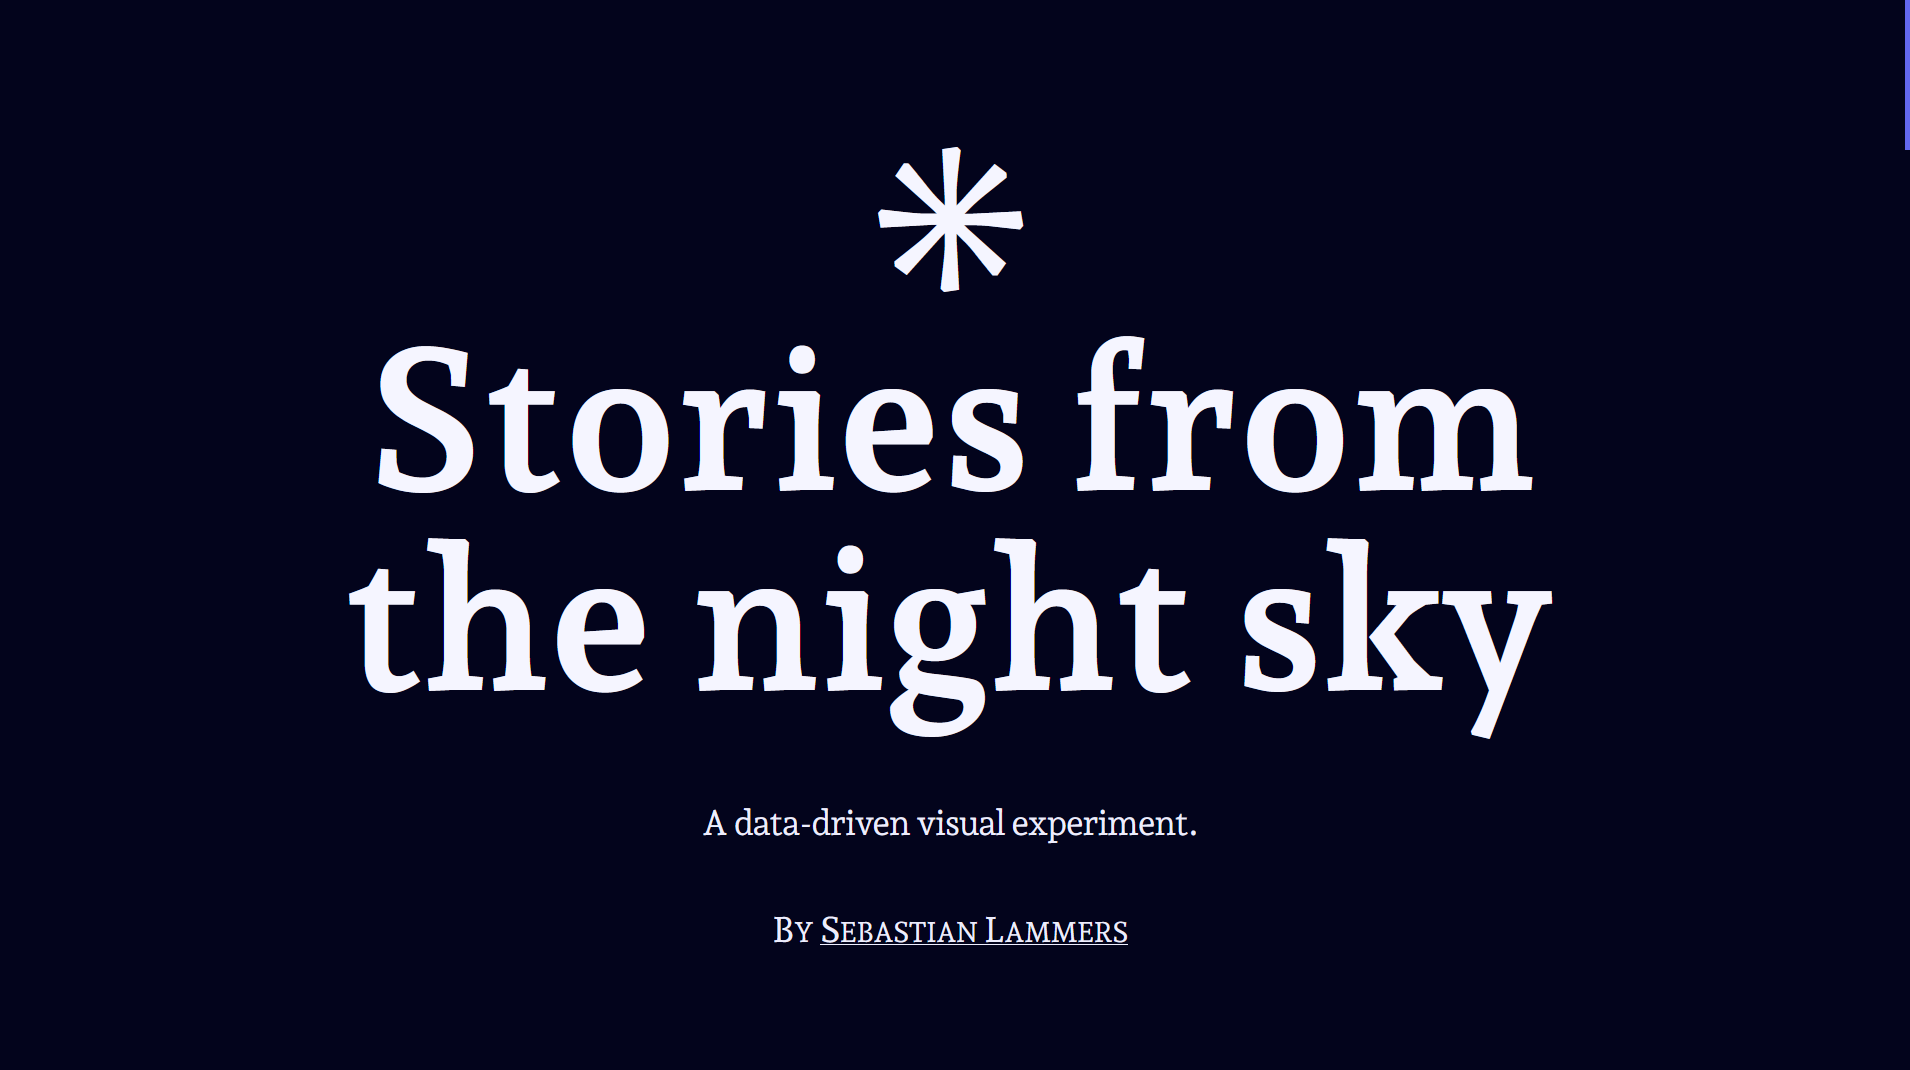 Screenshot with a big text that reads 'Stories from the night sky' in bold white letters on a dark blue background. On top there is a star-shaped icon and below the large text, smaller text reads 'A data-driven visual experiment.' and on a new line 'By Sebastian Lammers'.